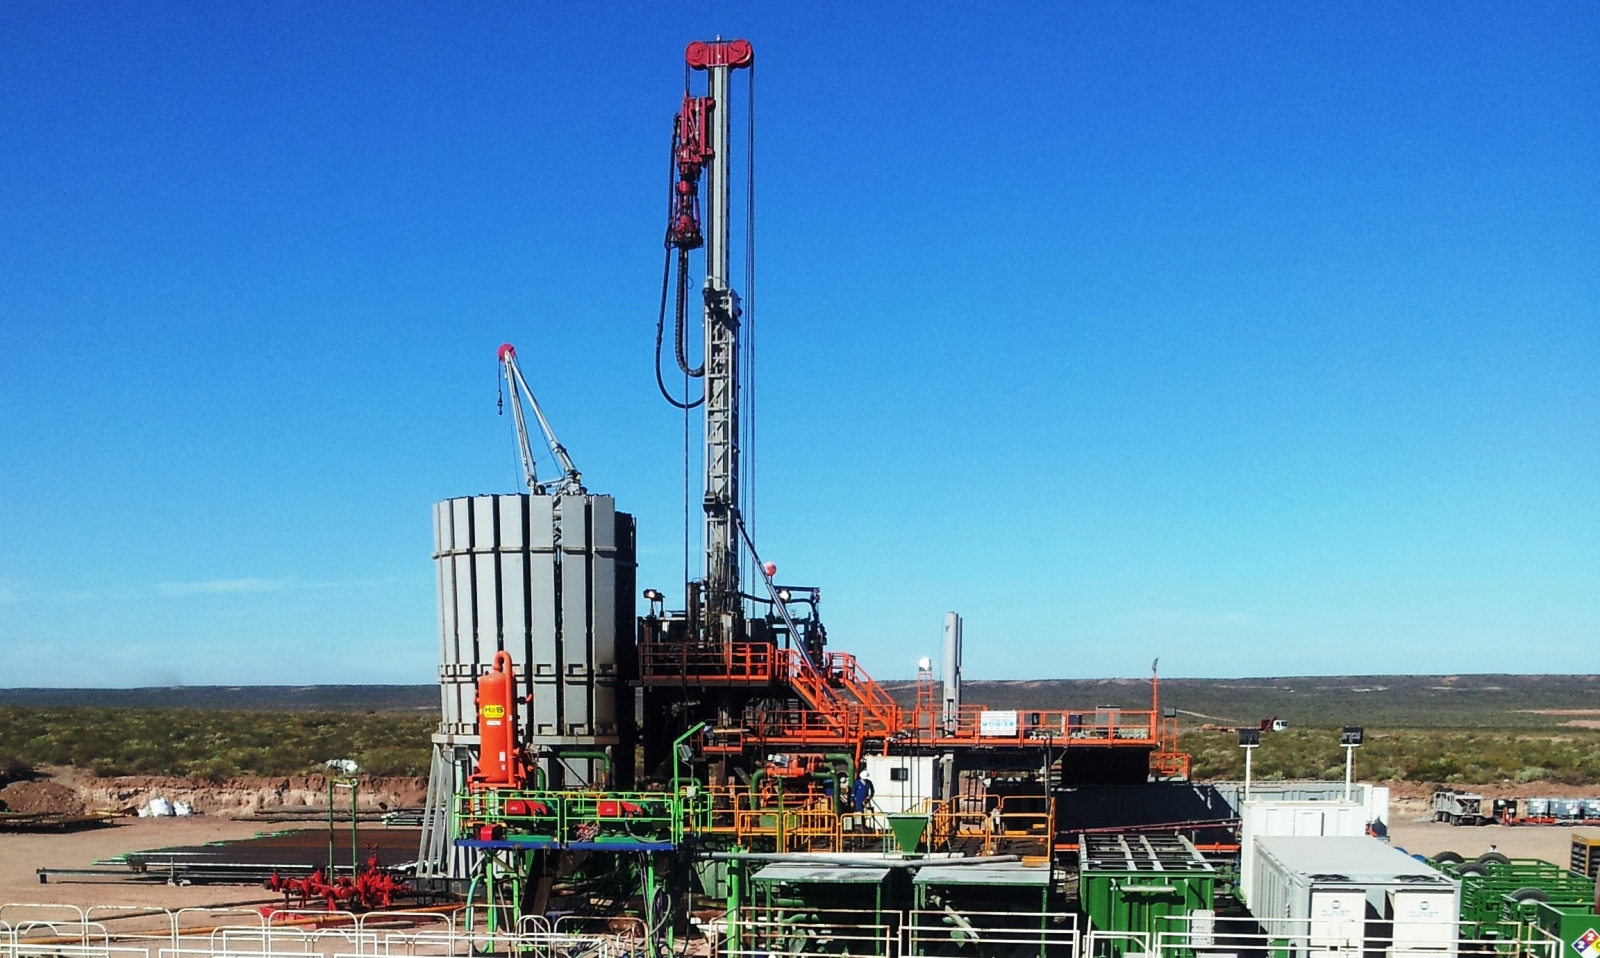 RECORD DEPTH OF 4,490 METERS IN ARGENTINA | News Trevi Group Italia 1